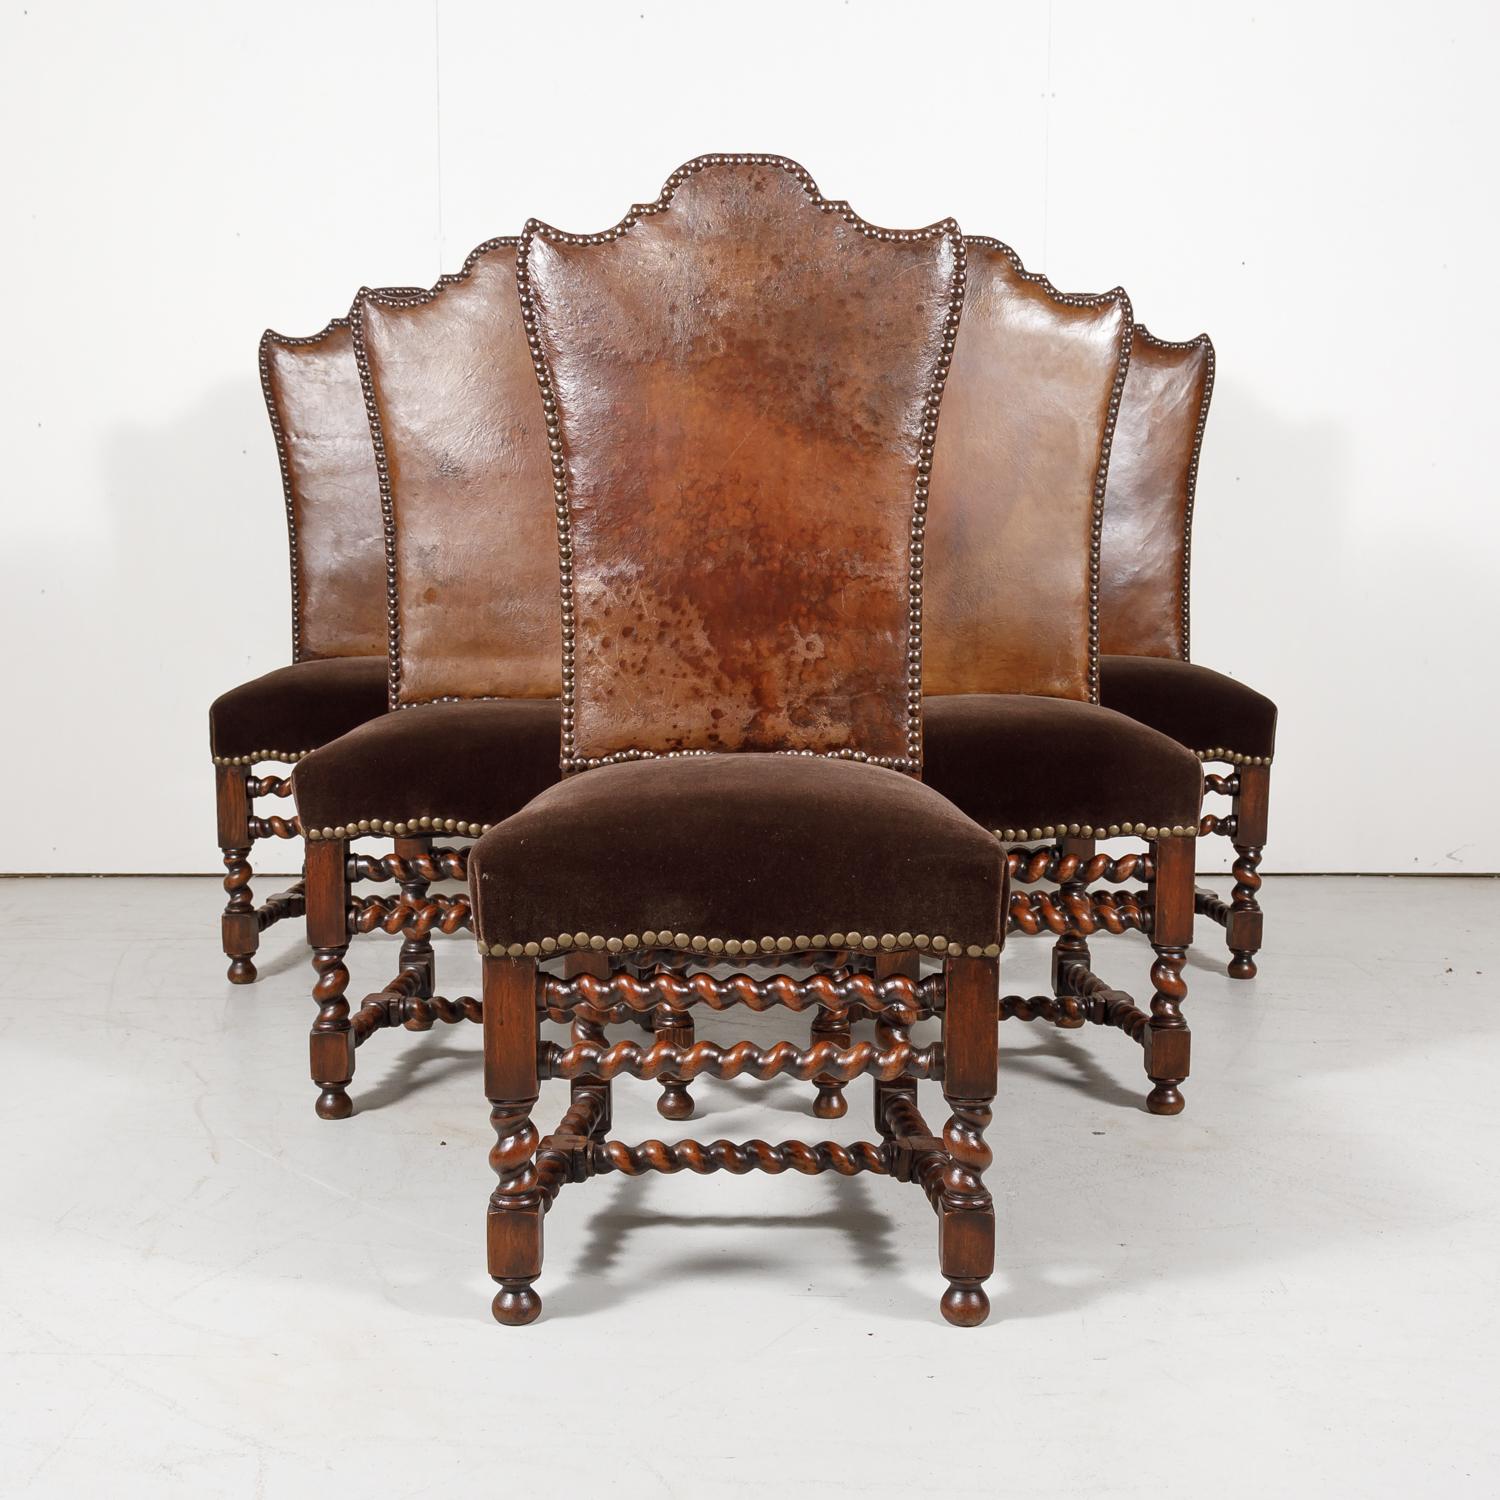 A beautiful set of six antique high back French Louis XIII style barley twist side chairs handcrafted and carved of old growth French oak by talented artisans in Bordeaux, having the original leather backs and newly upholstered mohair seats with